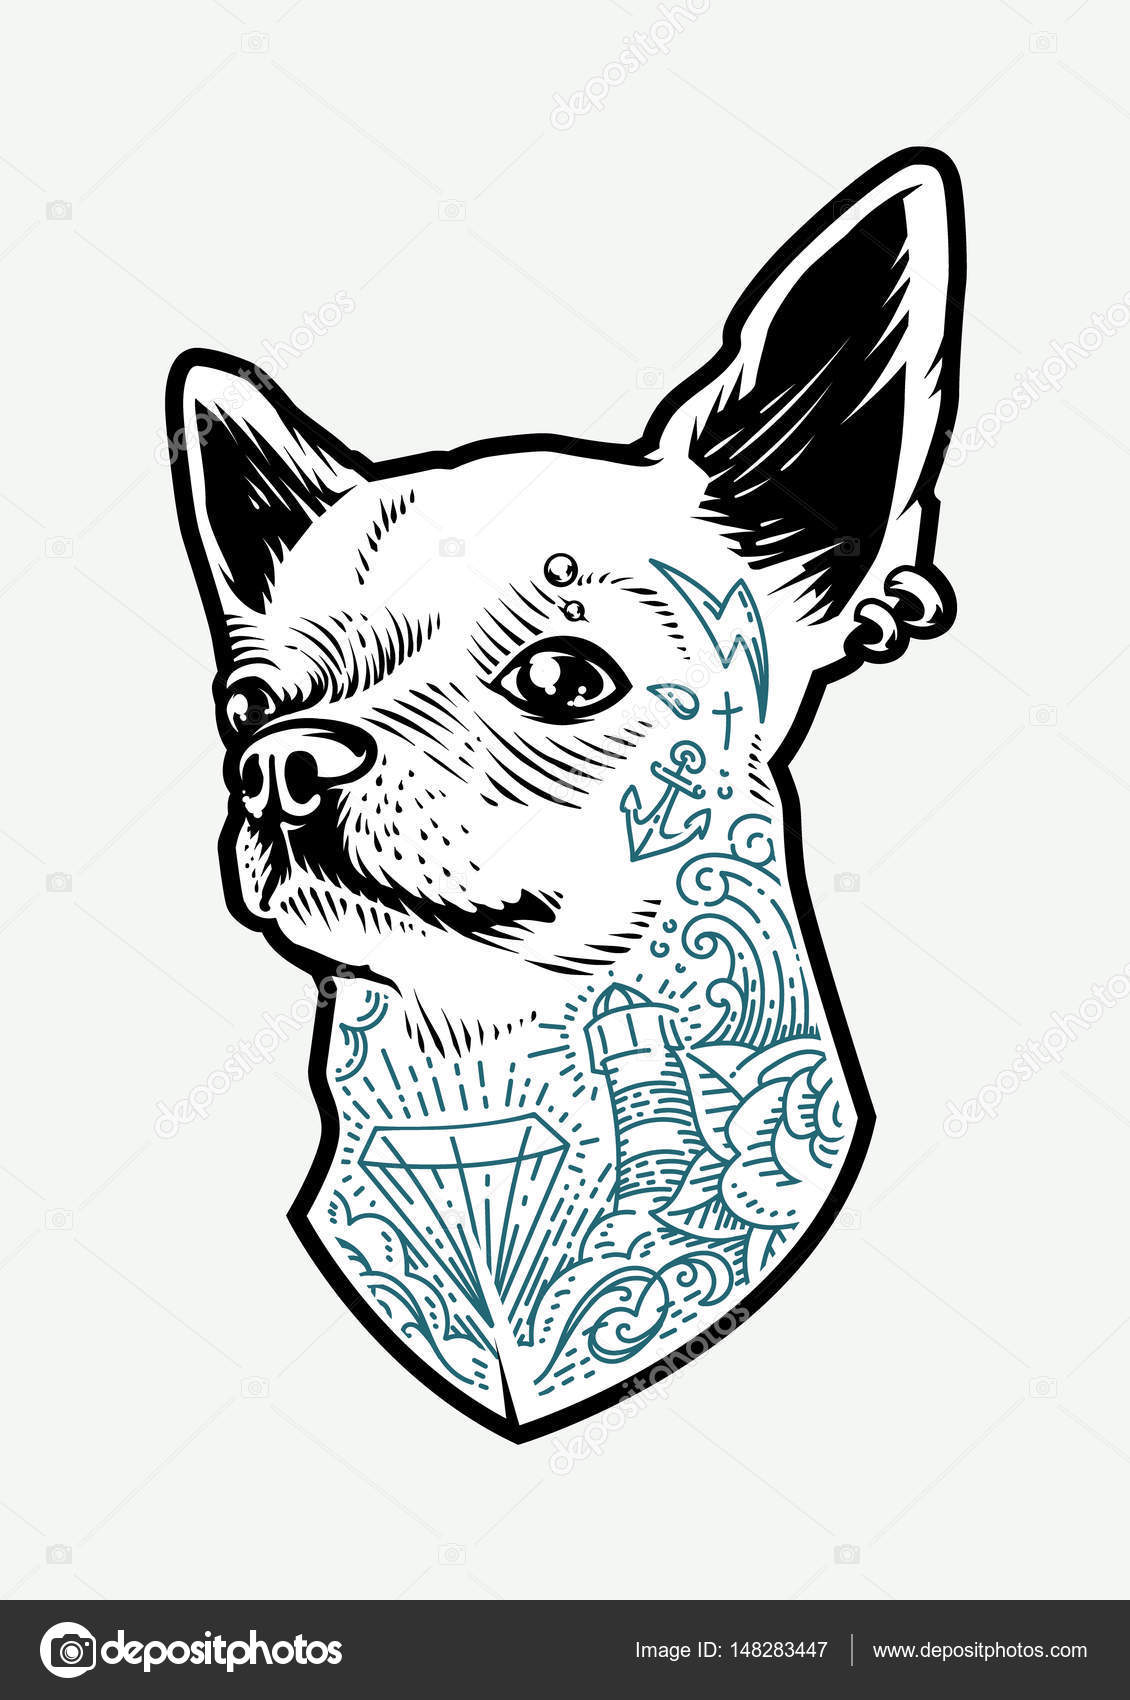 Chihuahua Silhouette Isolated On White Background Black Cartoon Dog Outline  Stock Illustration - Download Image Now - iStock